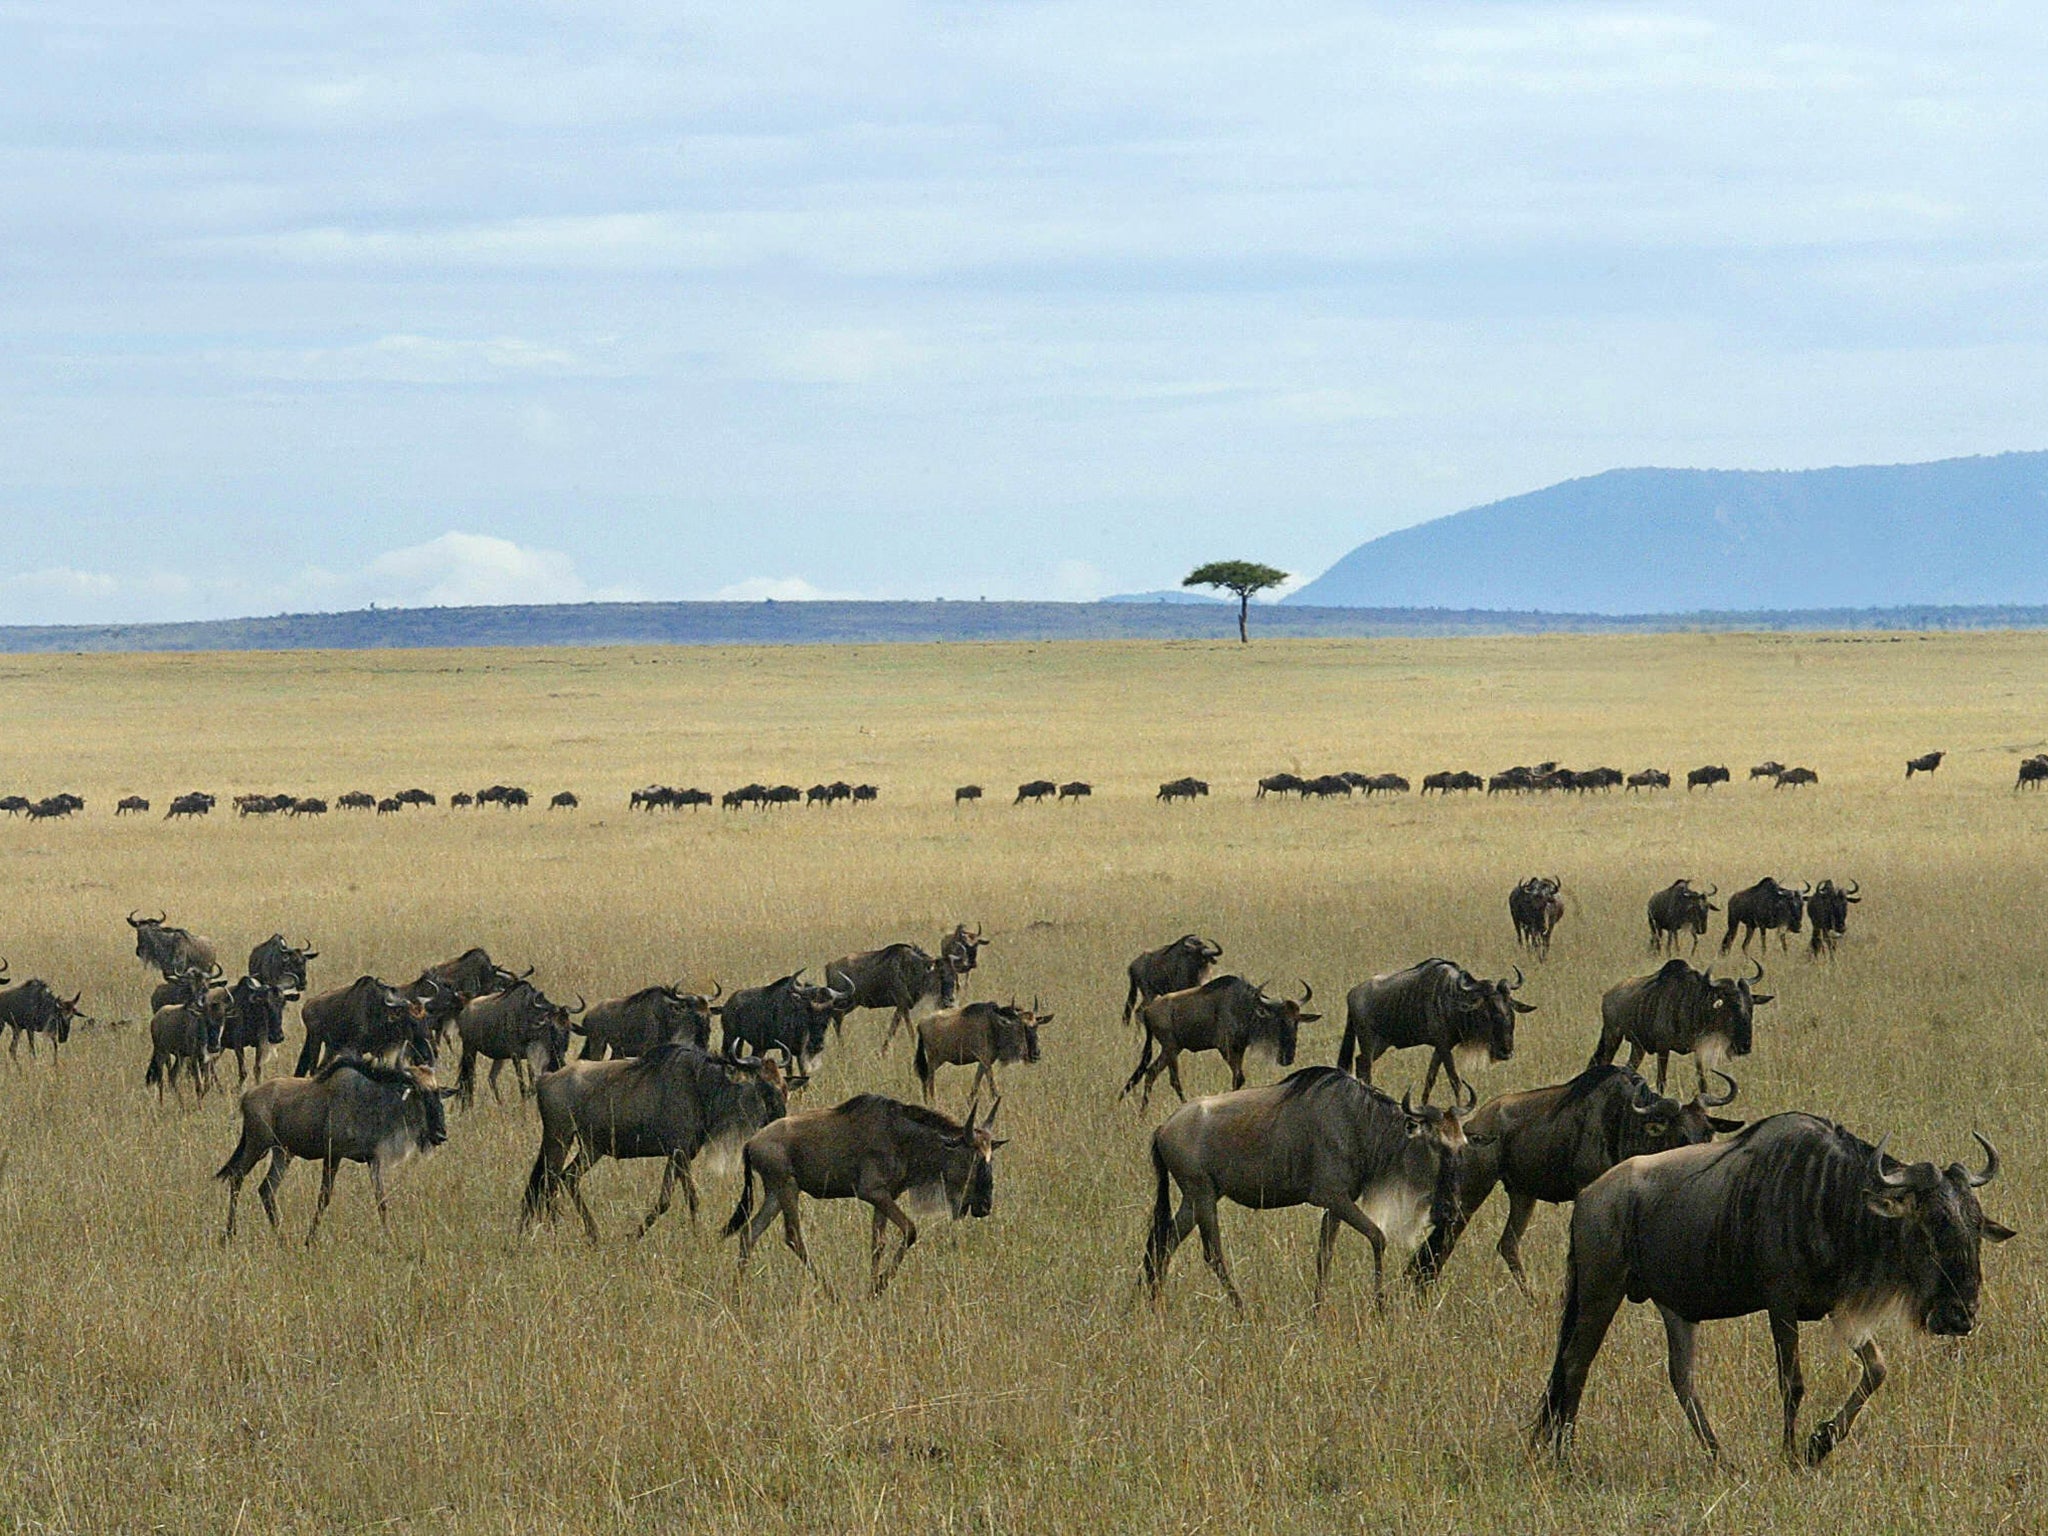 Wilderbeast are pictured in the Maasai Mara, approximately 400 kilometres southwest of Nairobi,